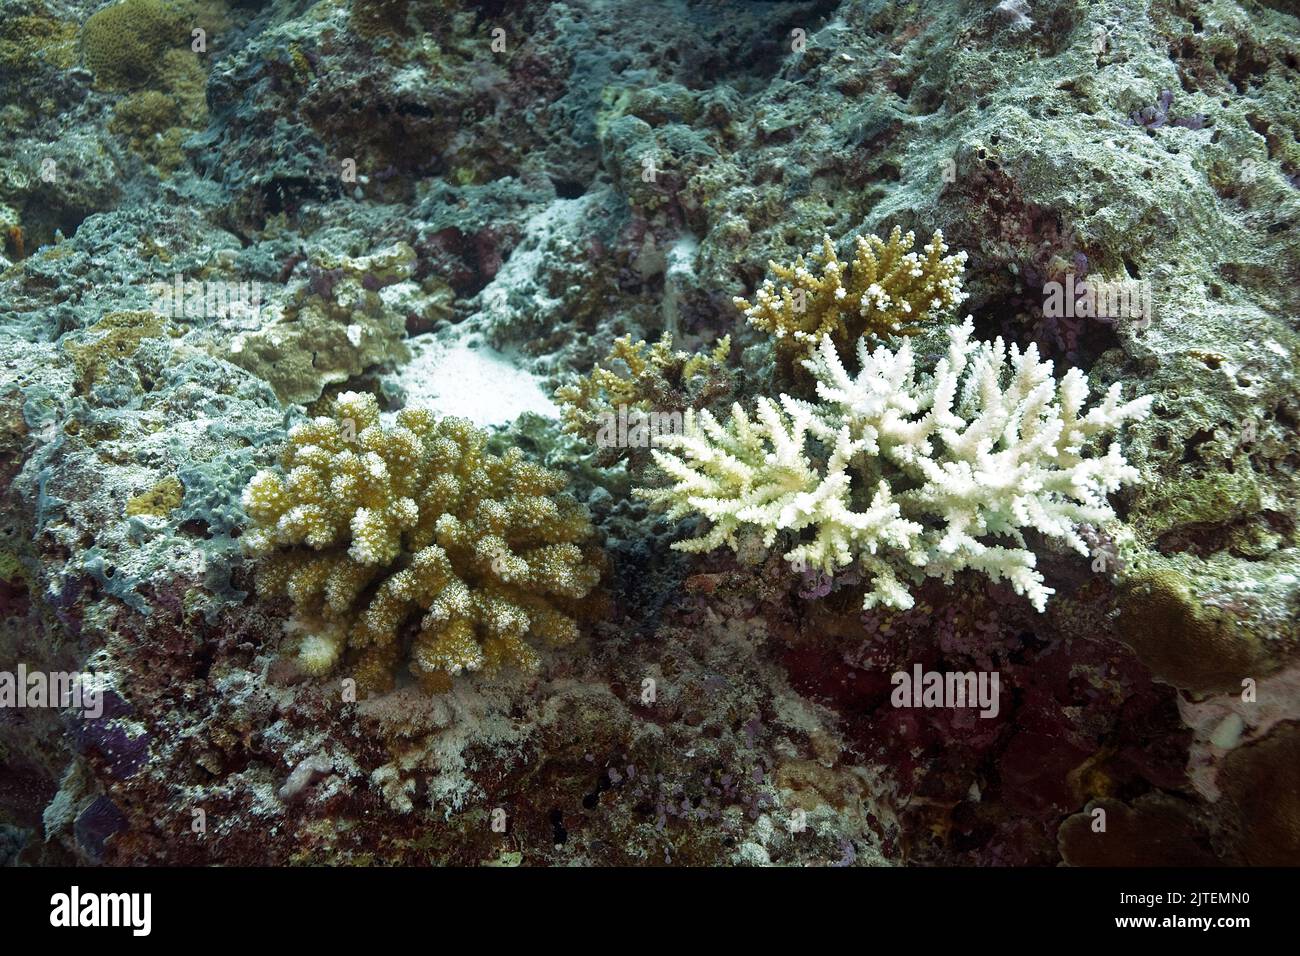 Coral bleaching, climate change due to global warming degrades the health of coral reefs, Maldives, Indian ocean Stock Photo